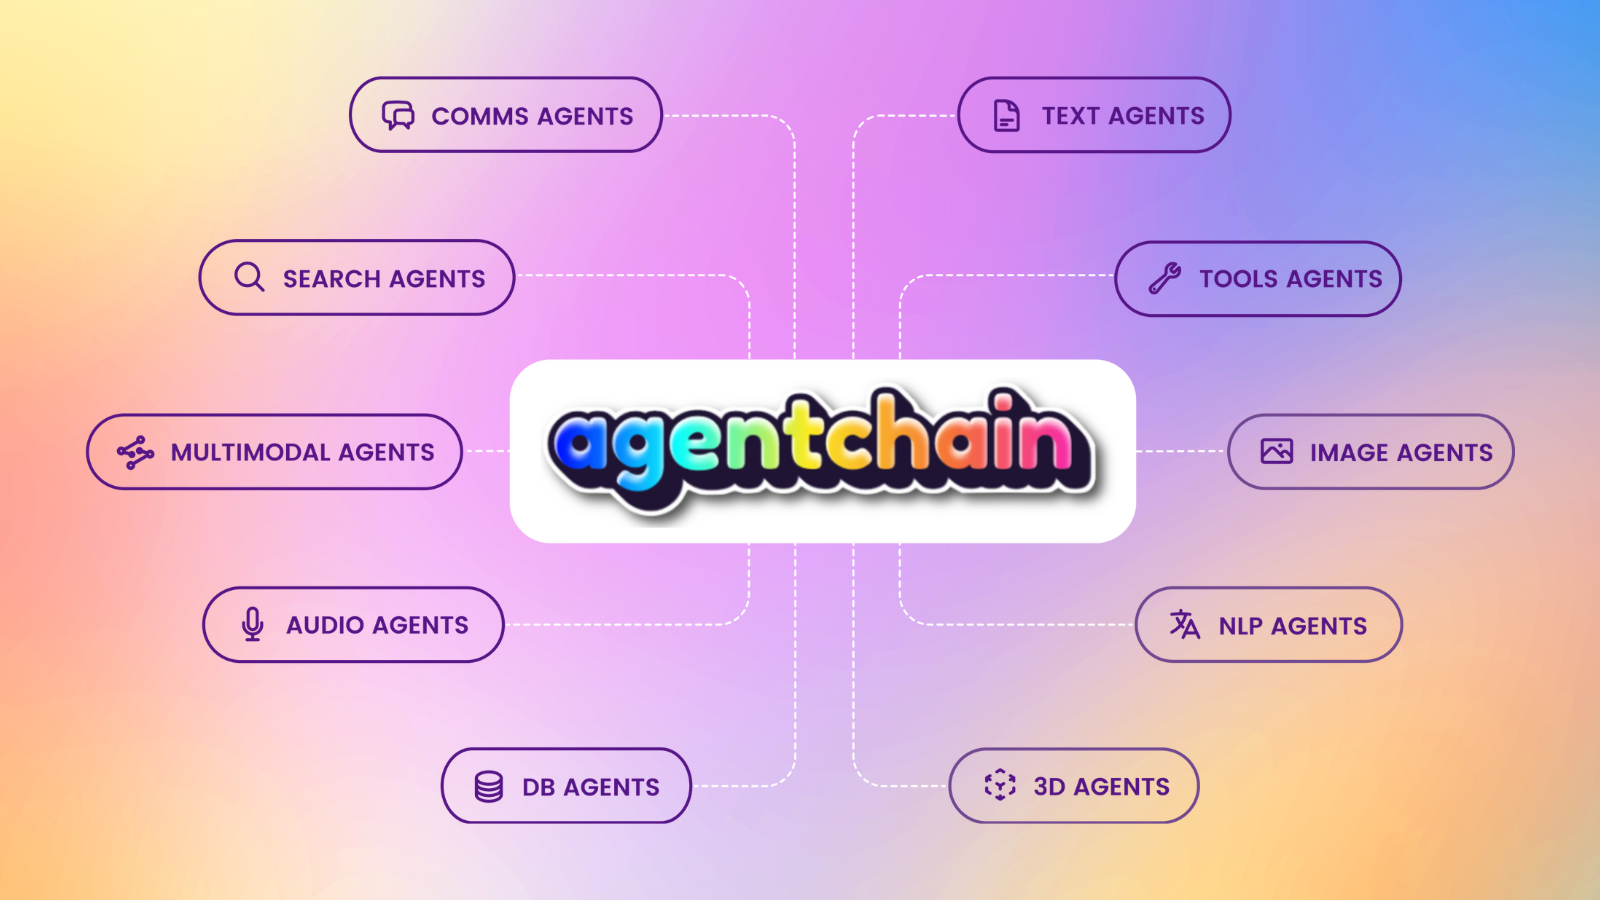 Mind map with "Agentchain" at the center and surrounding agent types: Comms, Search, Text, Tools, Multimodal, Image, Audio, D